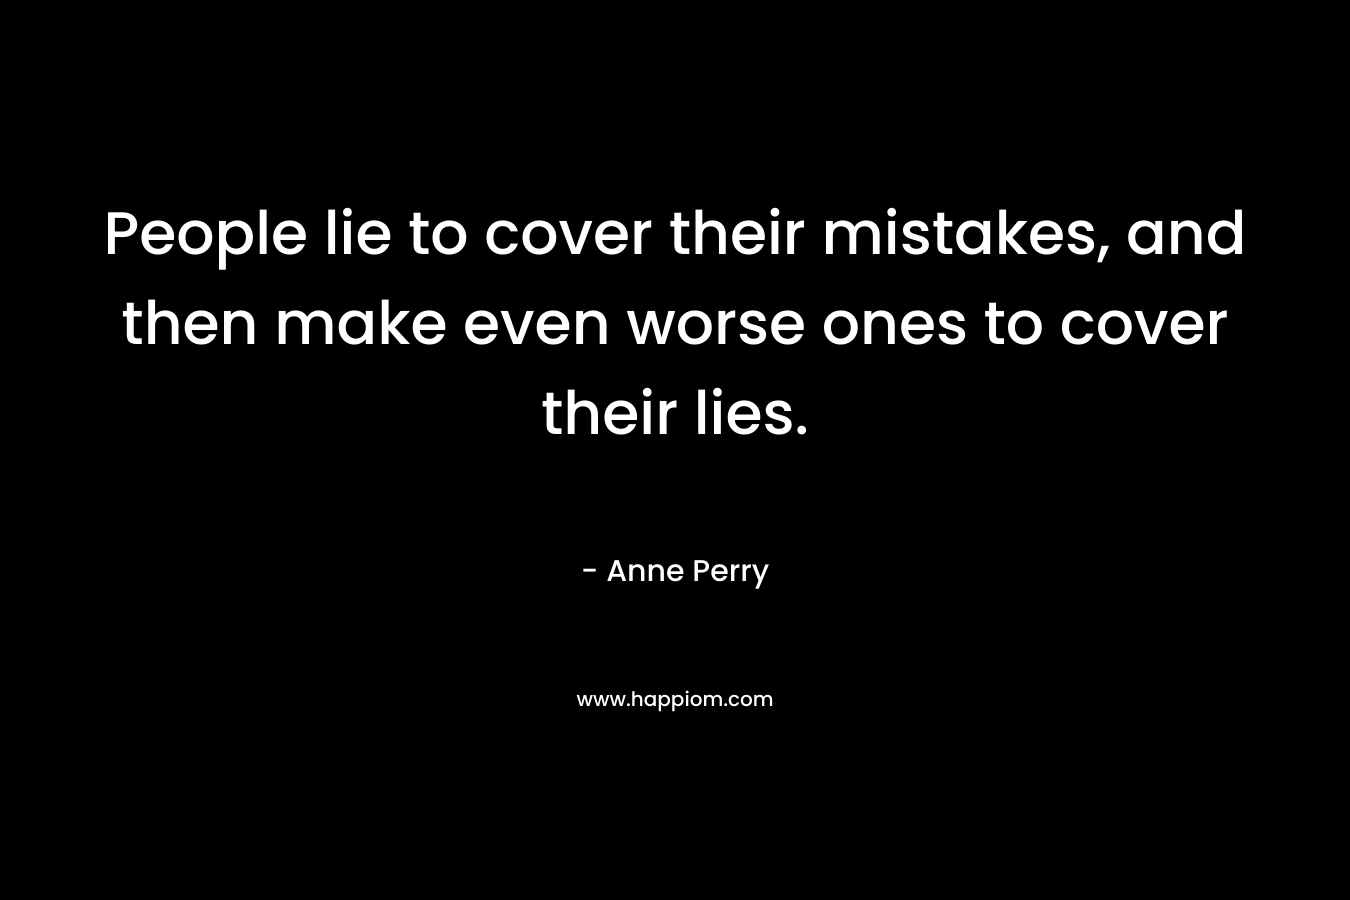 People lie to cover their mistakes, and then make even worse ones to cover their lies. – Anne Perry